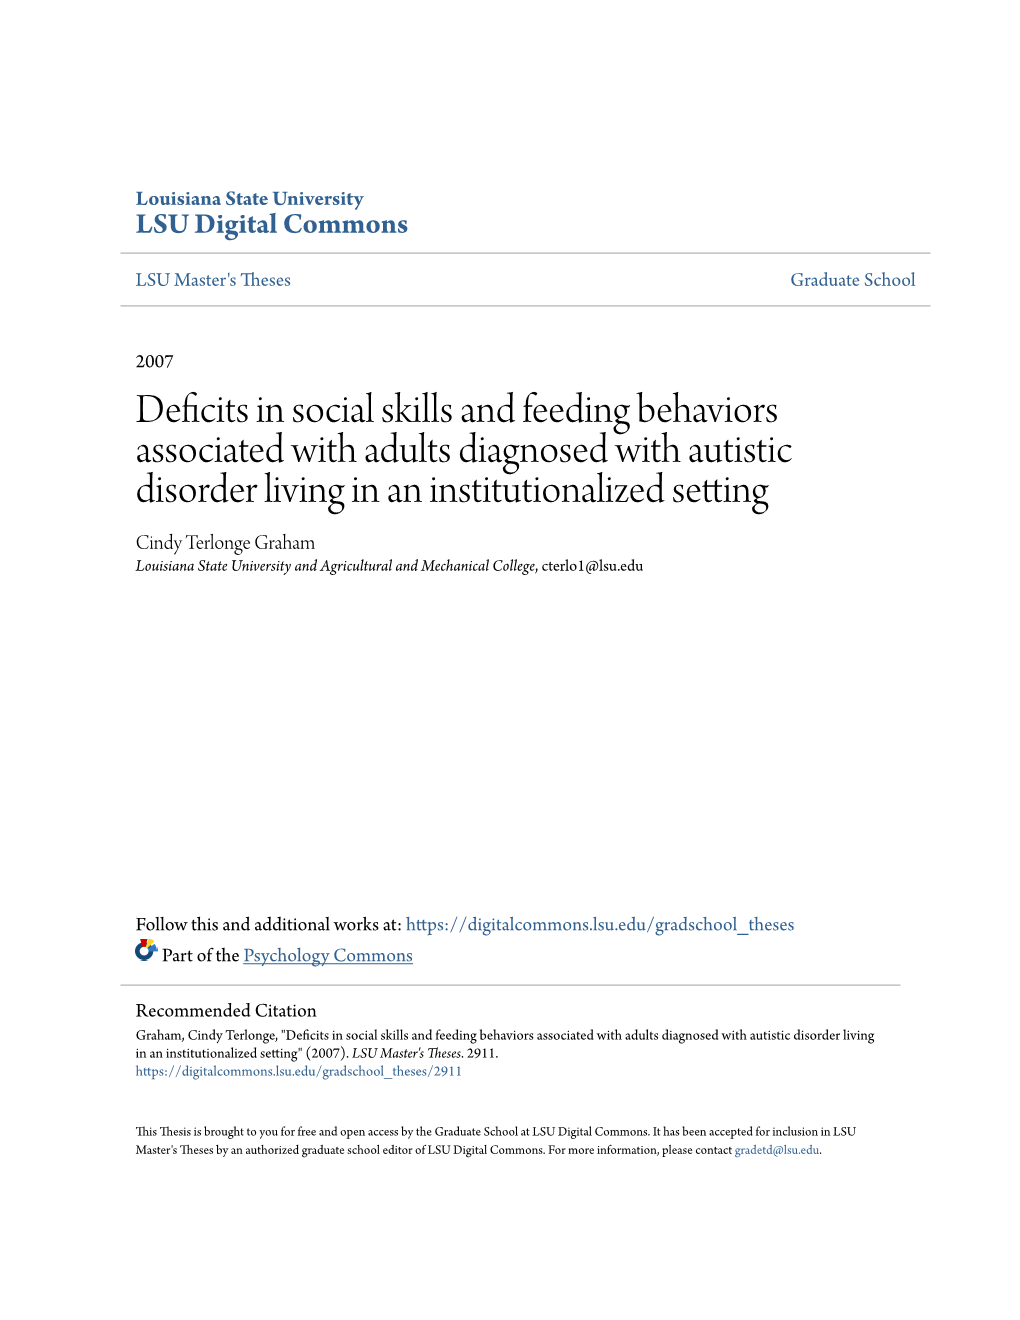 Deficits in Social Skills and Feeding Behaviors Associated with Adults